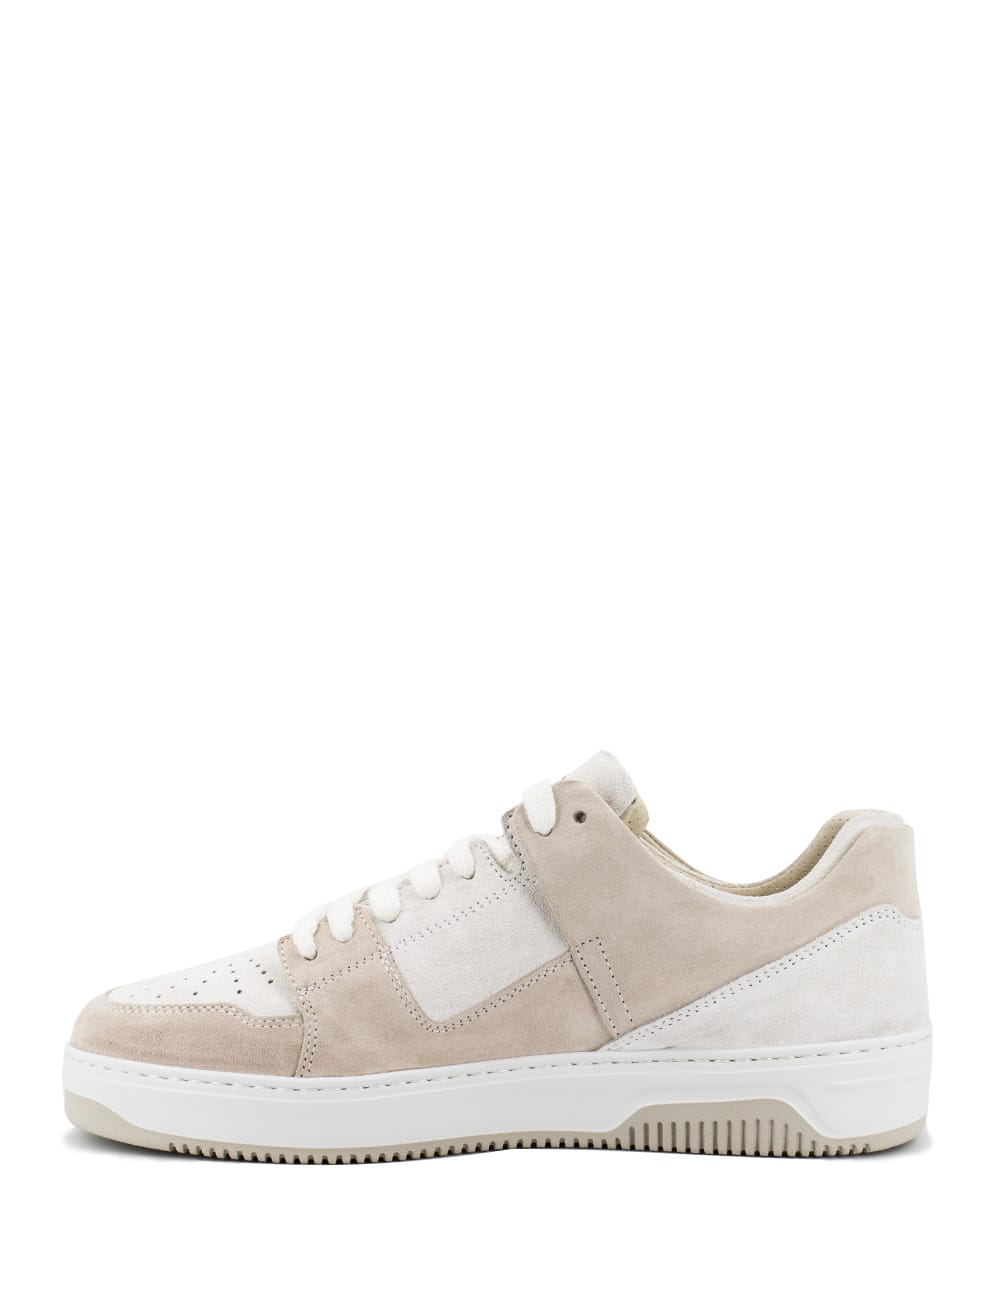 Shop Eleventy Sneakers In Sand And White